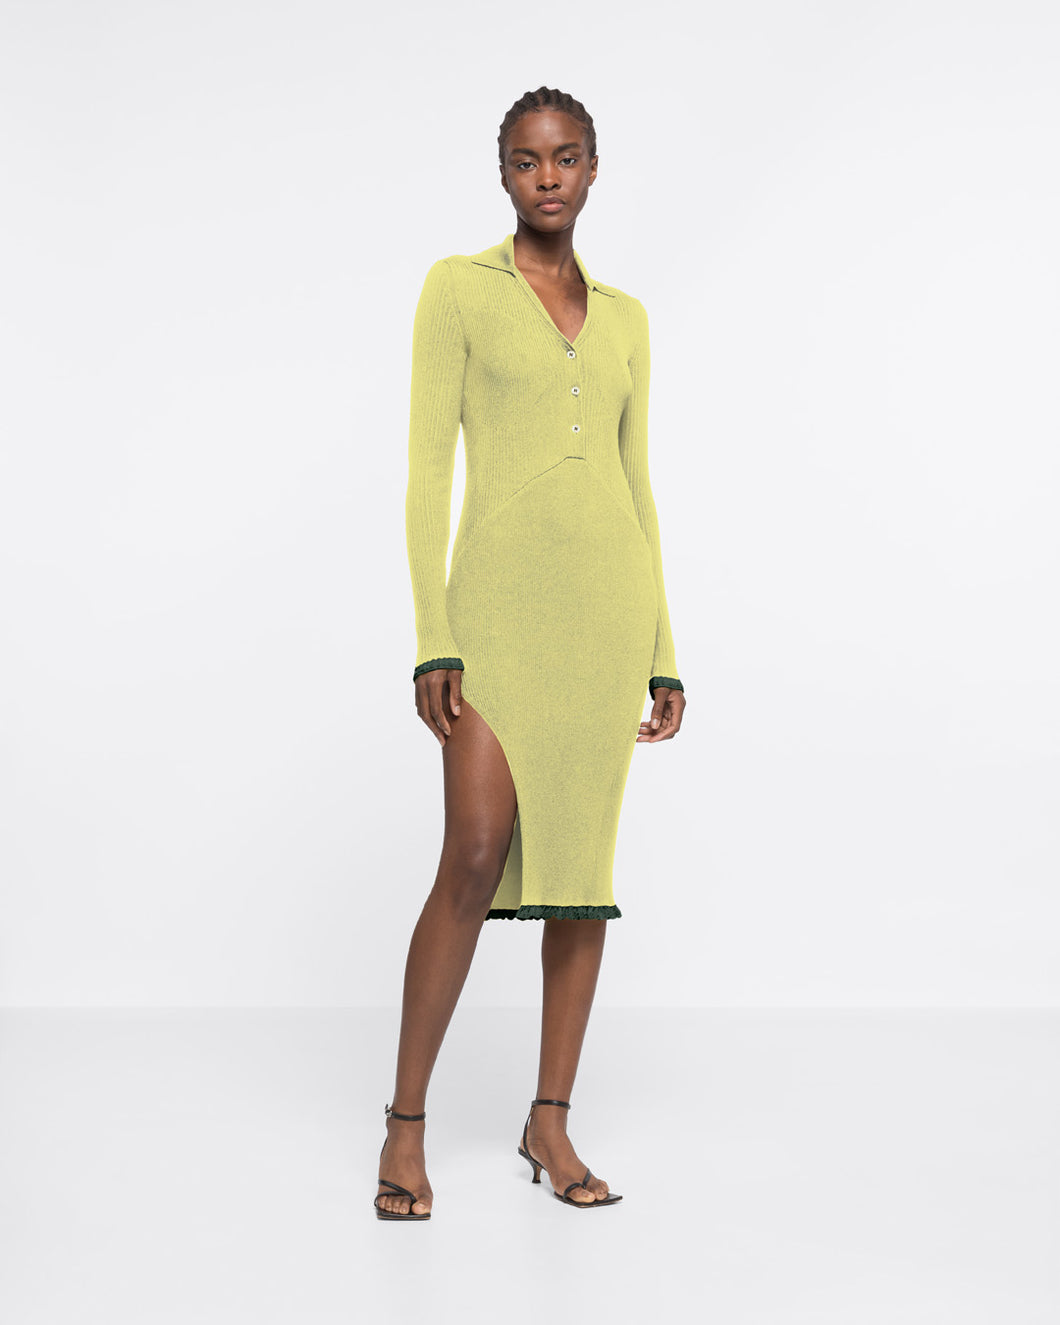 RIBBED KNIT BUTTON-DOWN DRESS - YELLOW/GREY